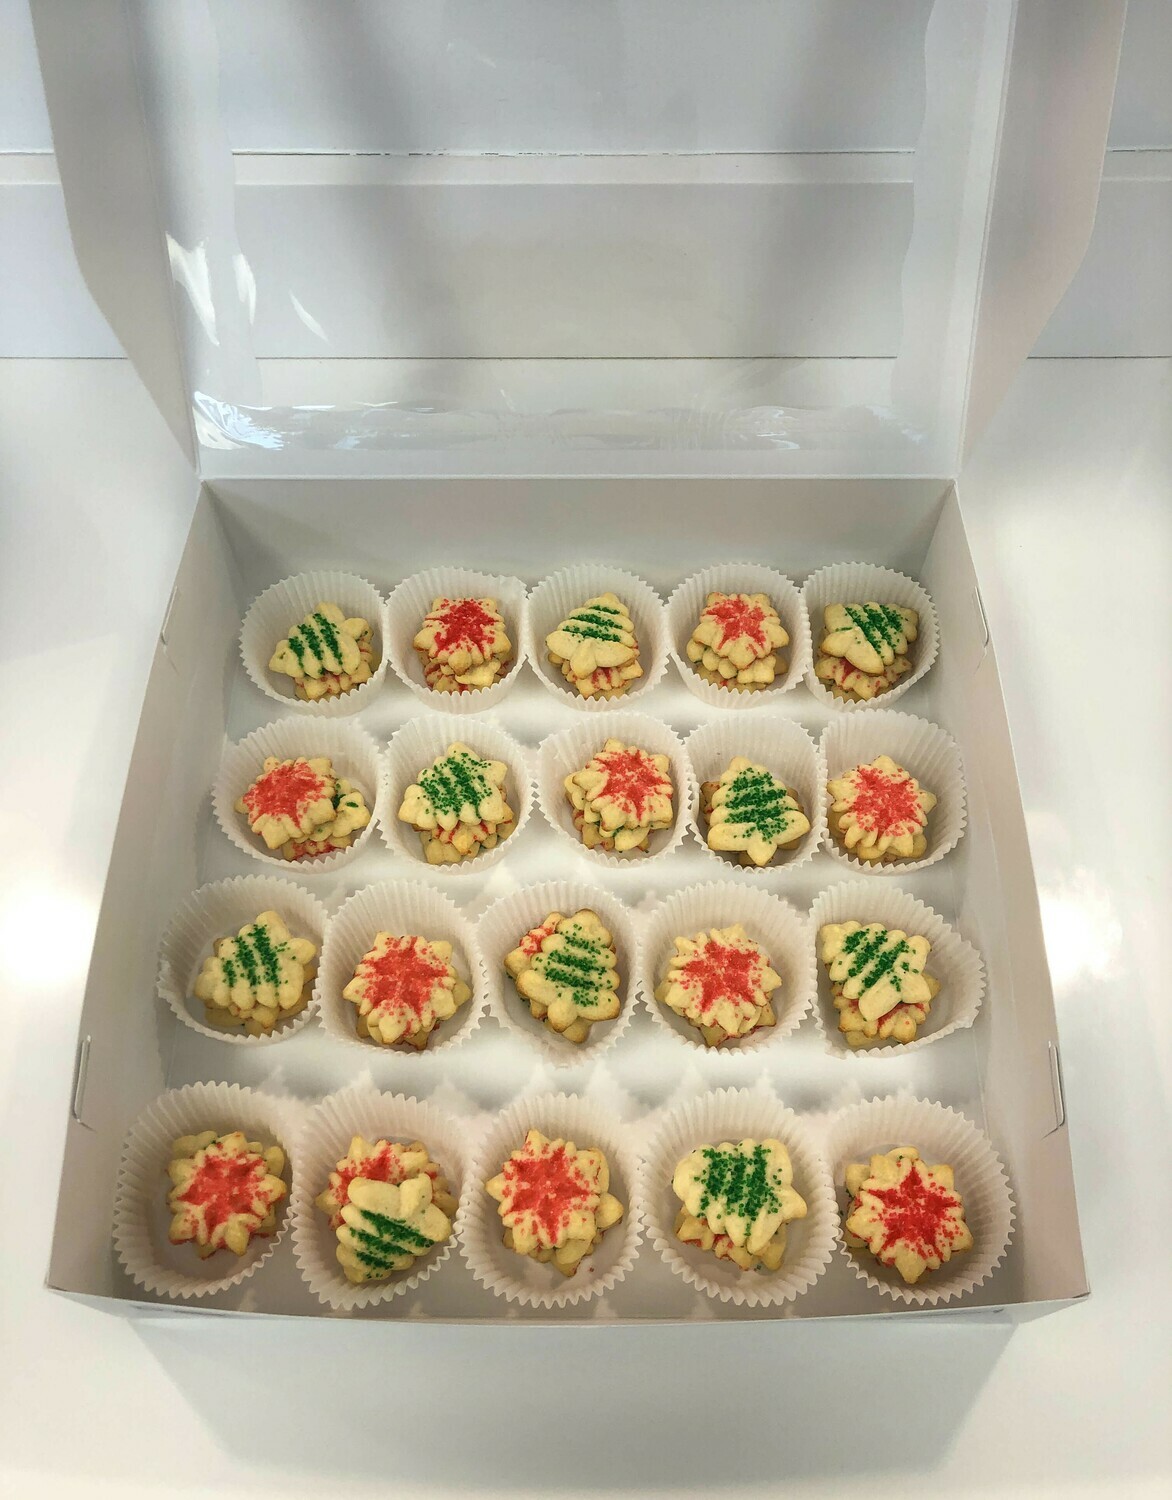 Christmas Butter Cookies